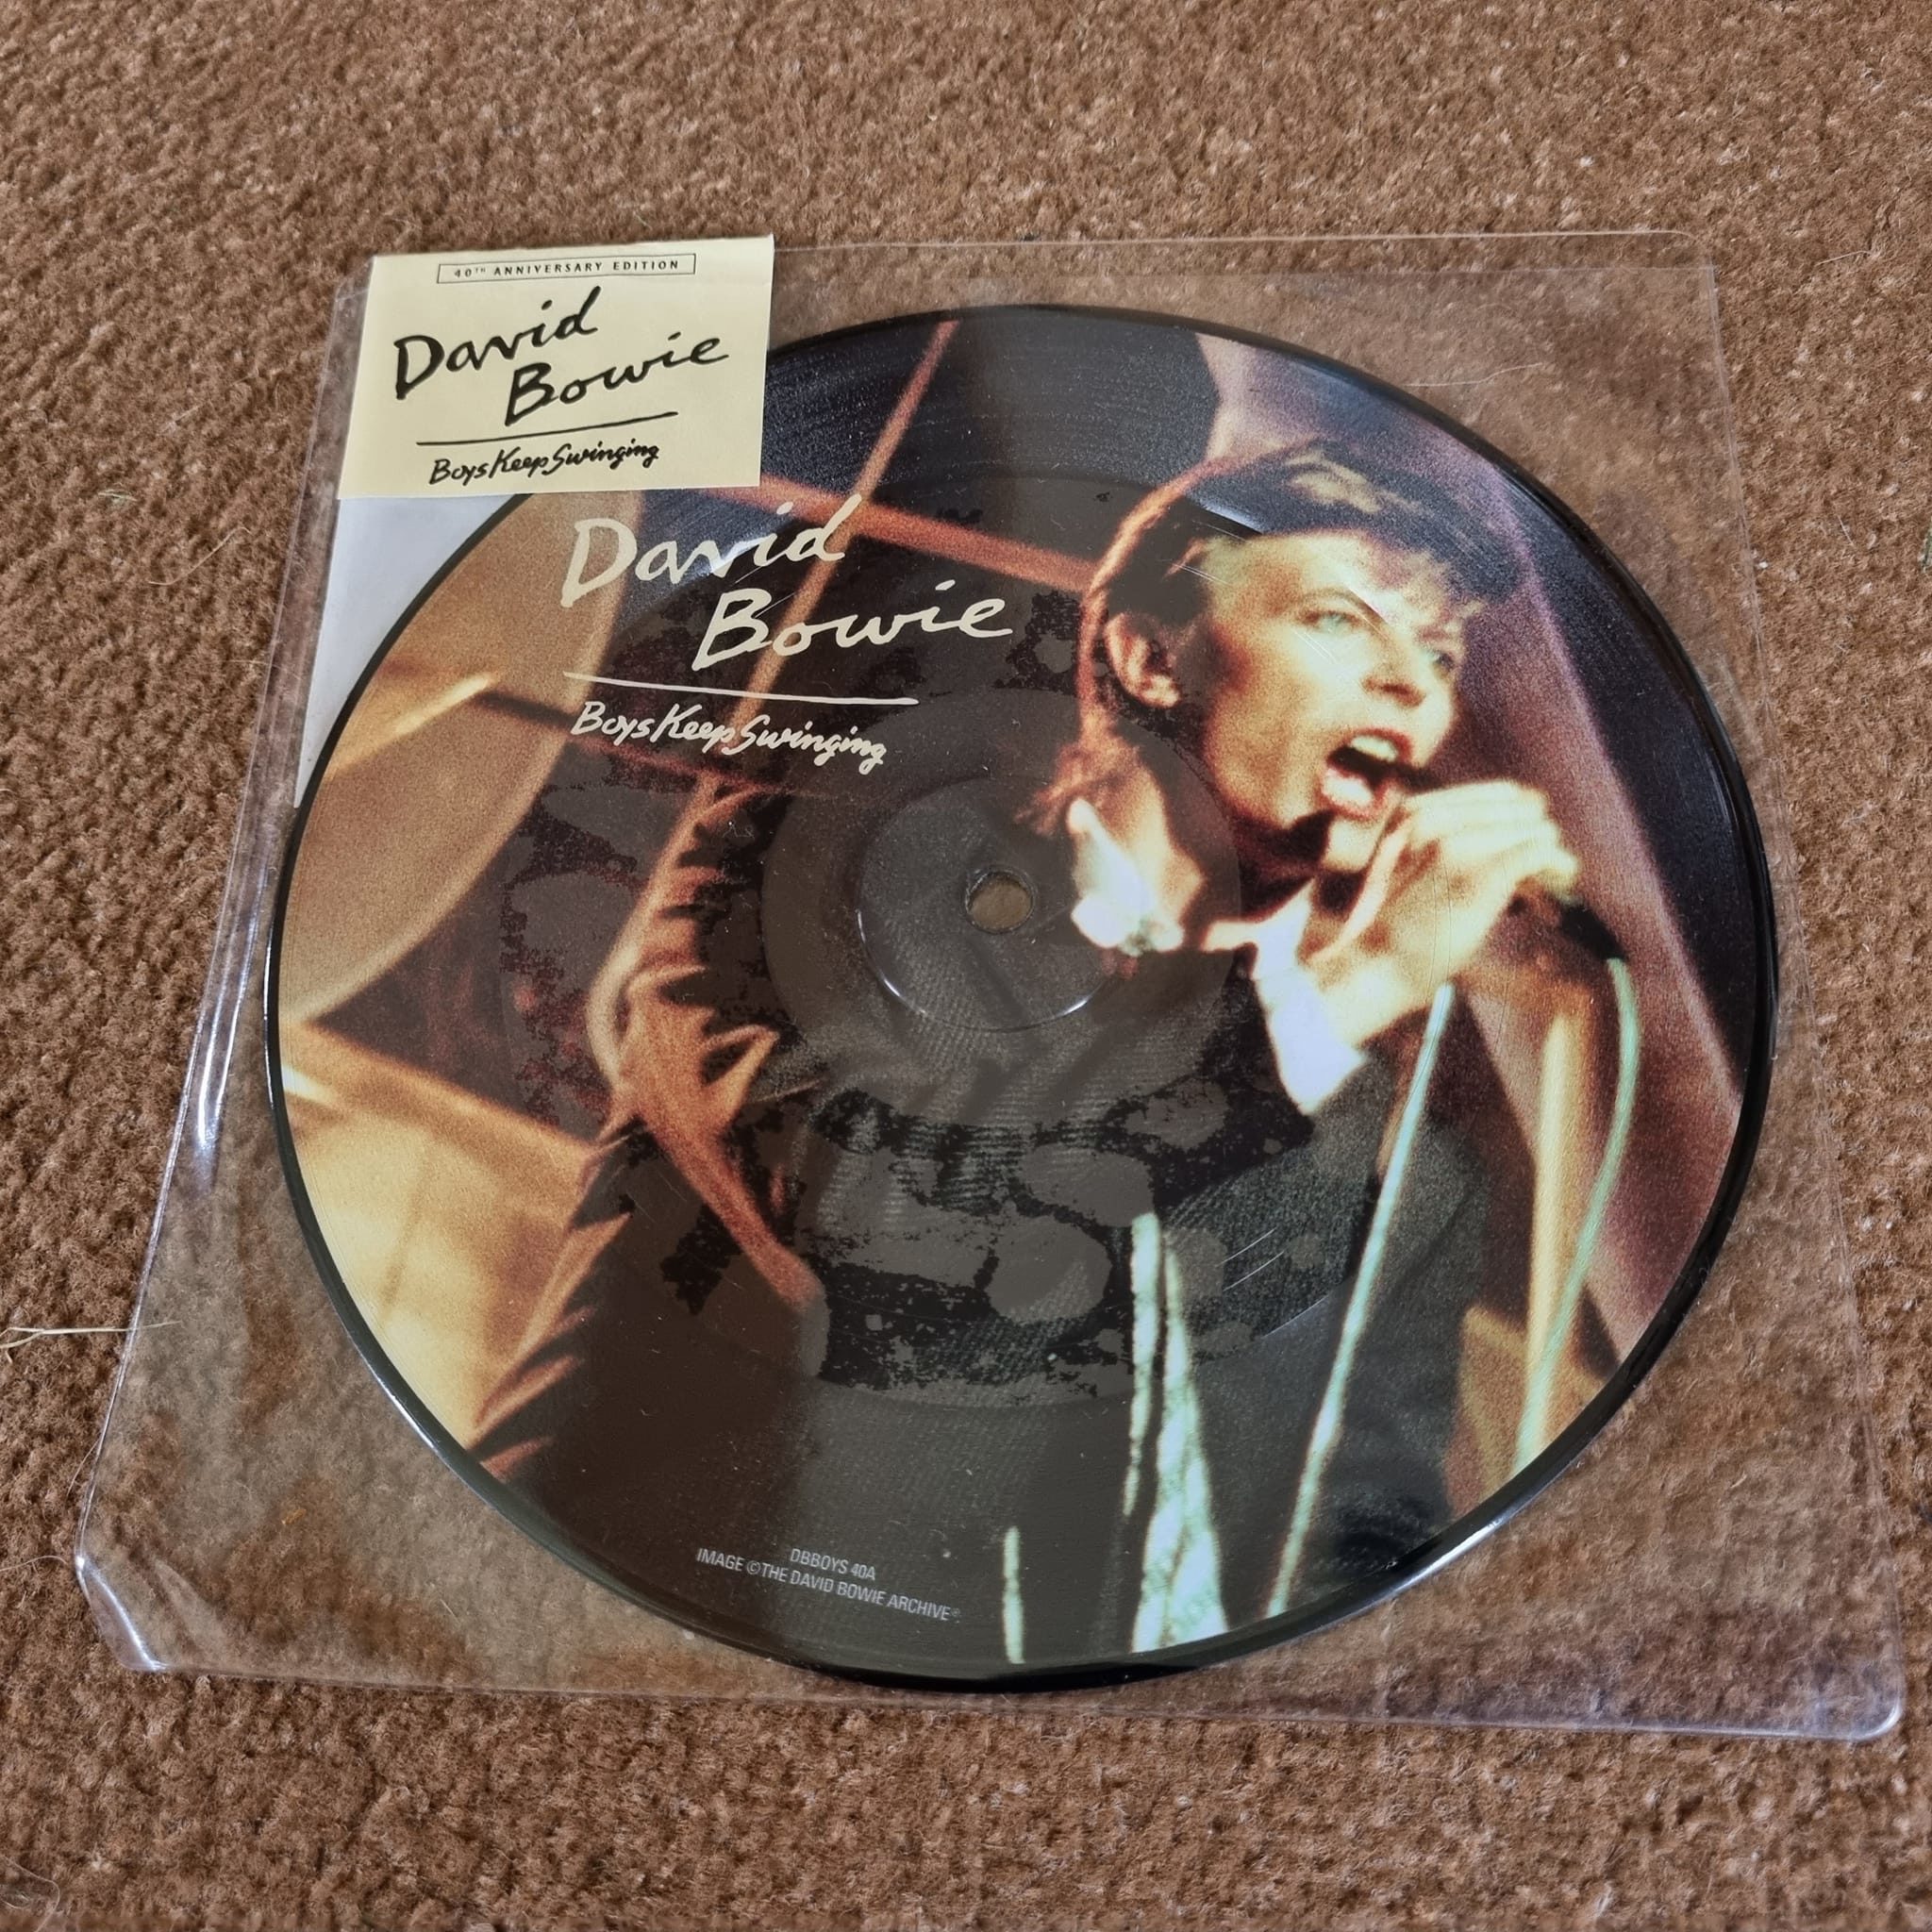 Buy this rare David Bowie record by clicking here